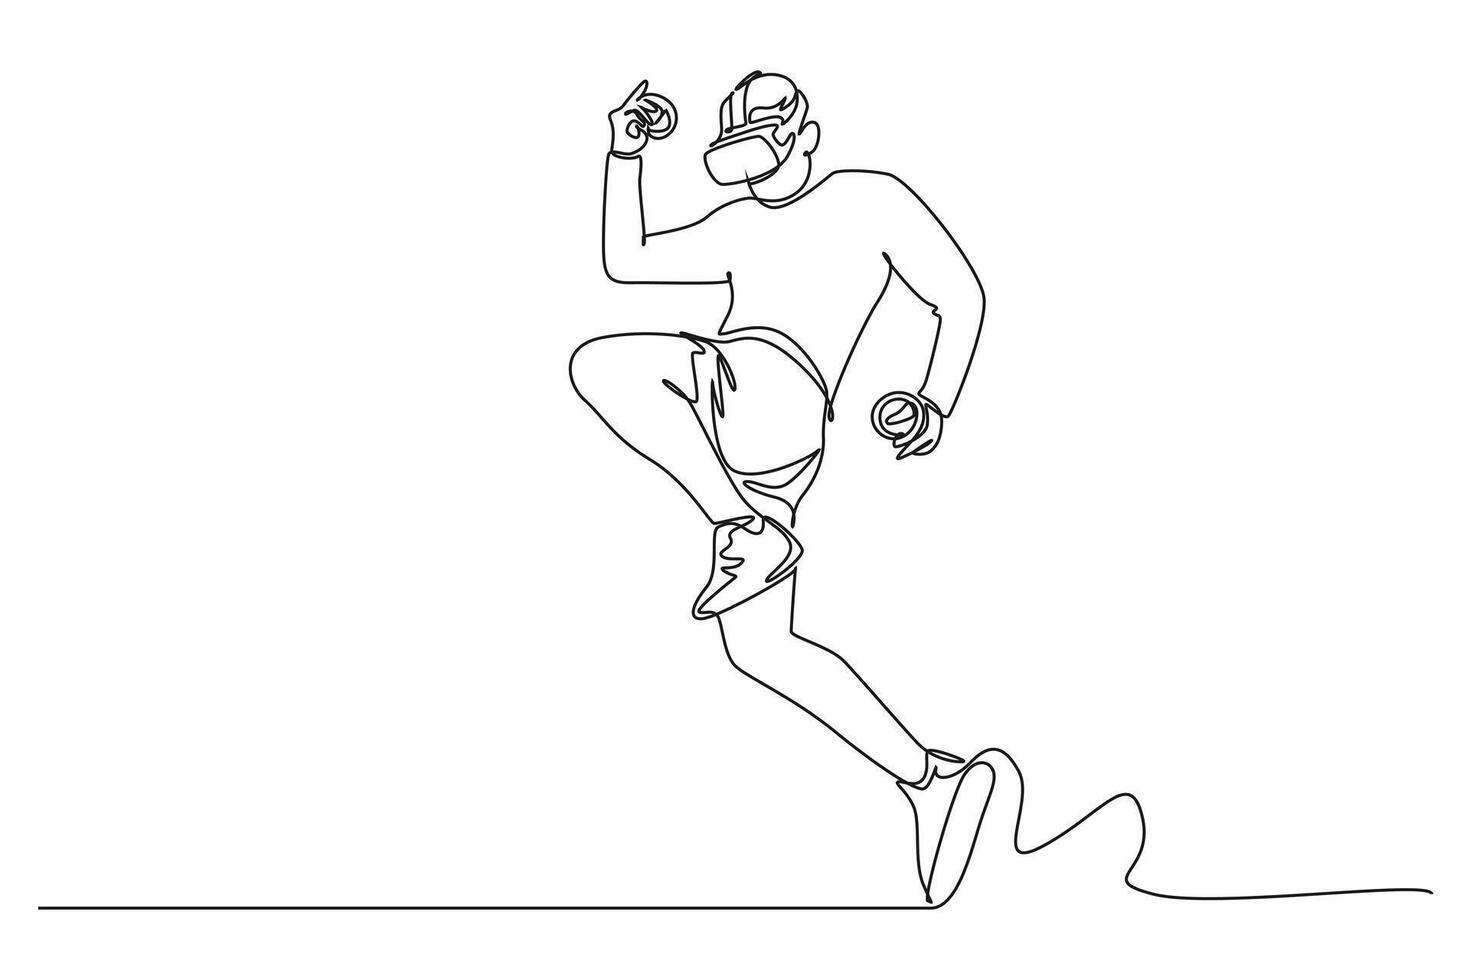 One continuous line drawing of virtual game concept. Doodle vector illustration in simple linear style.